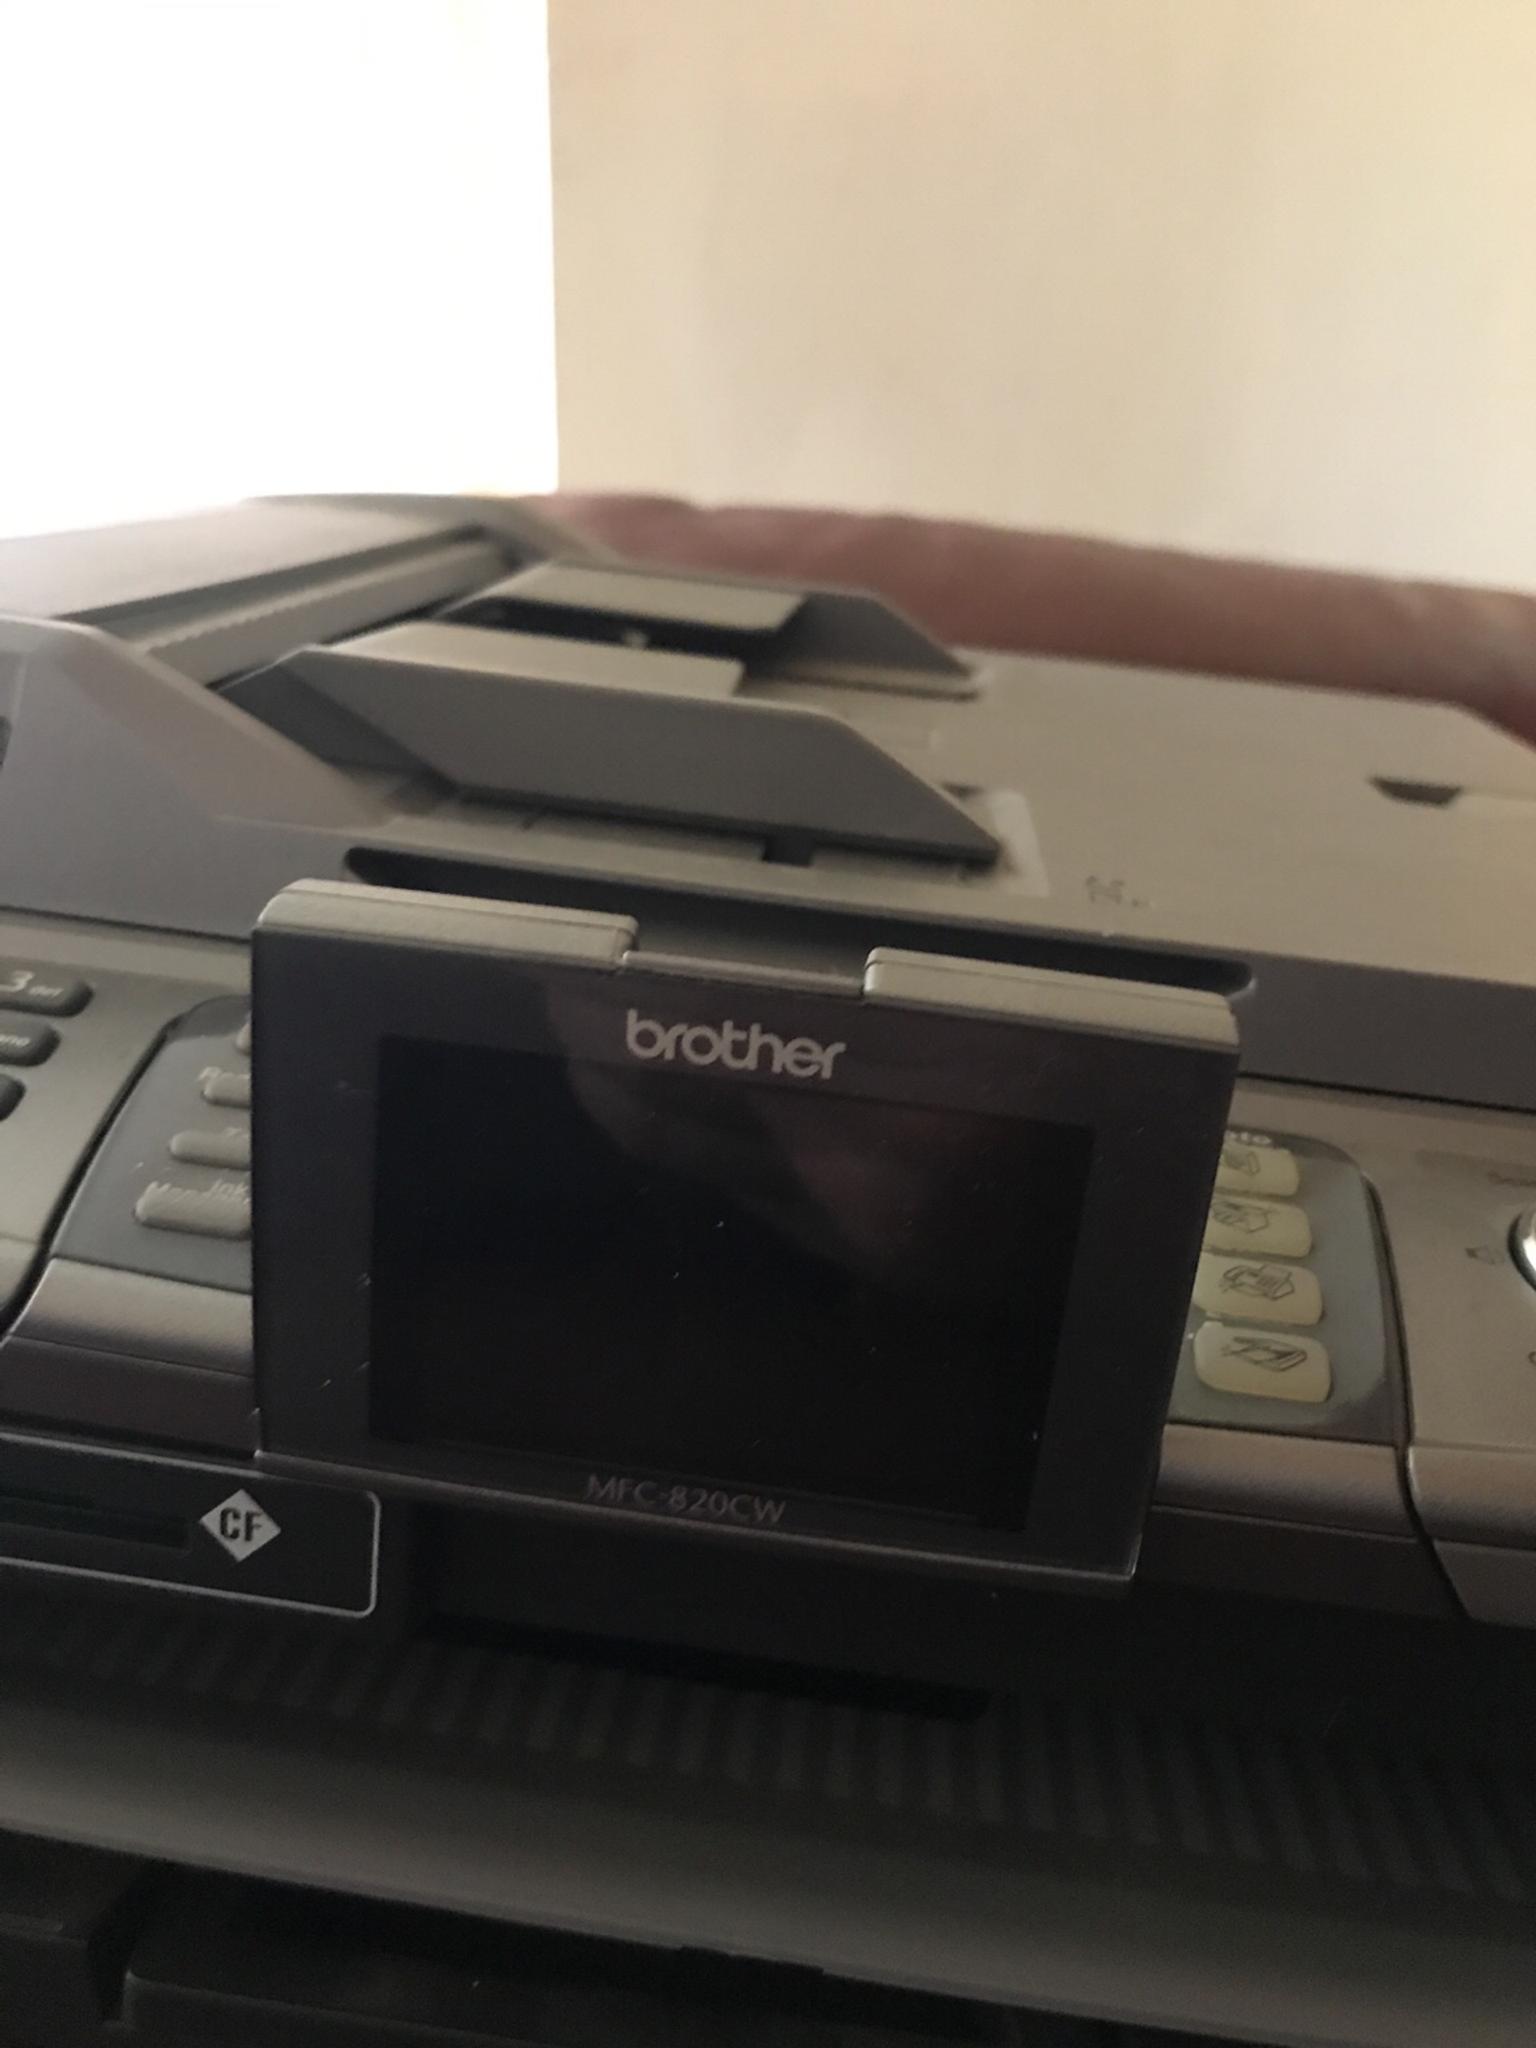 BROTHER MFC-820CW SCANNER WINDOWS 8 DRIVERS DOWNLOAD (2019)